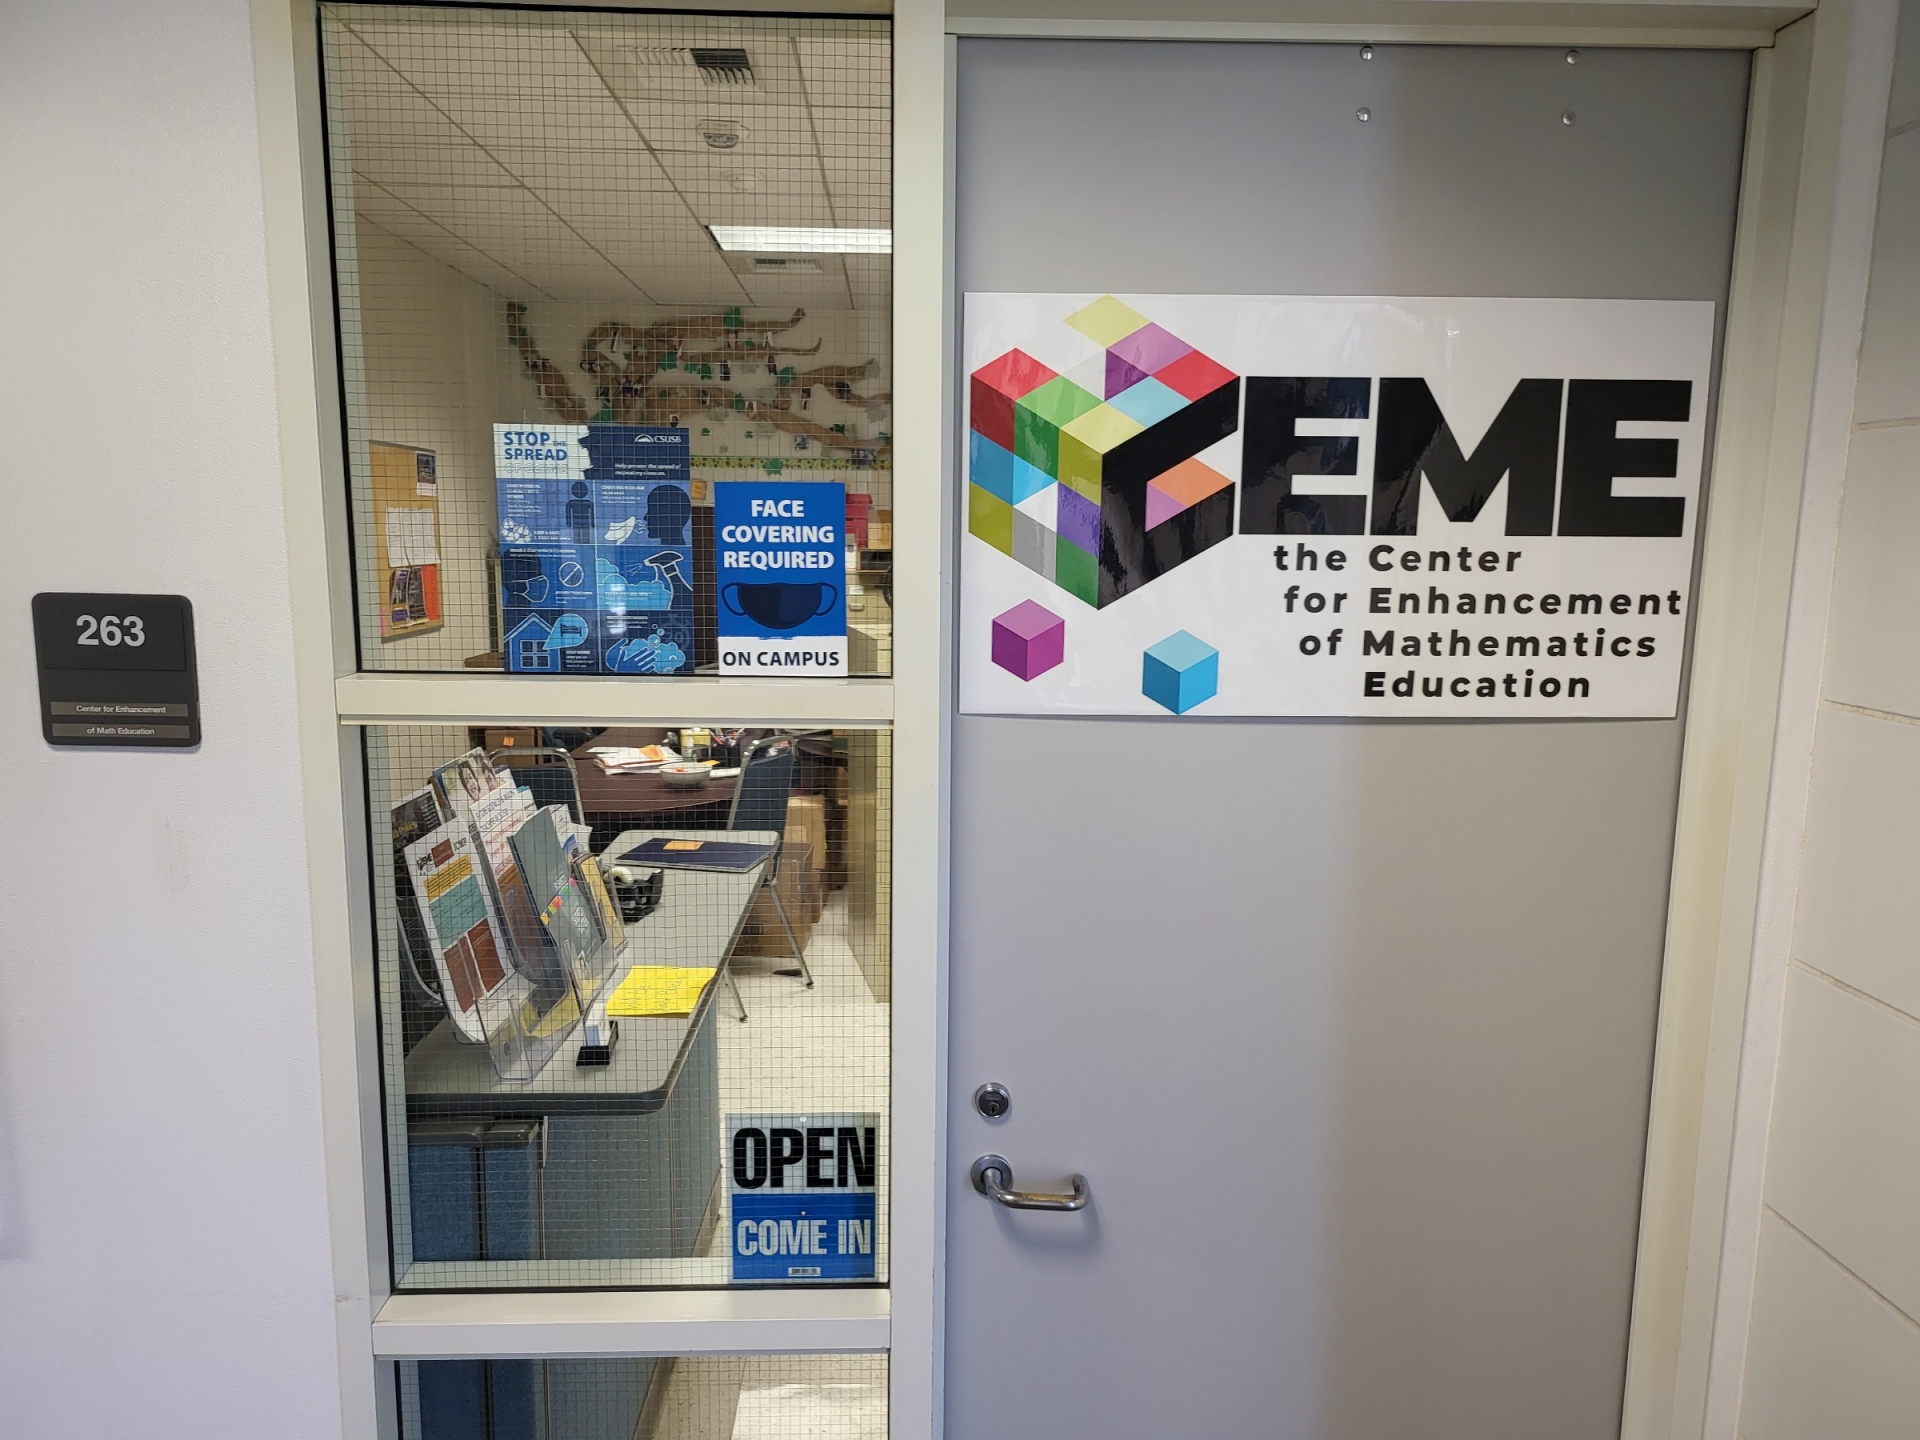 A picture of the CEME office